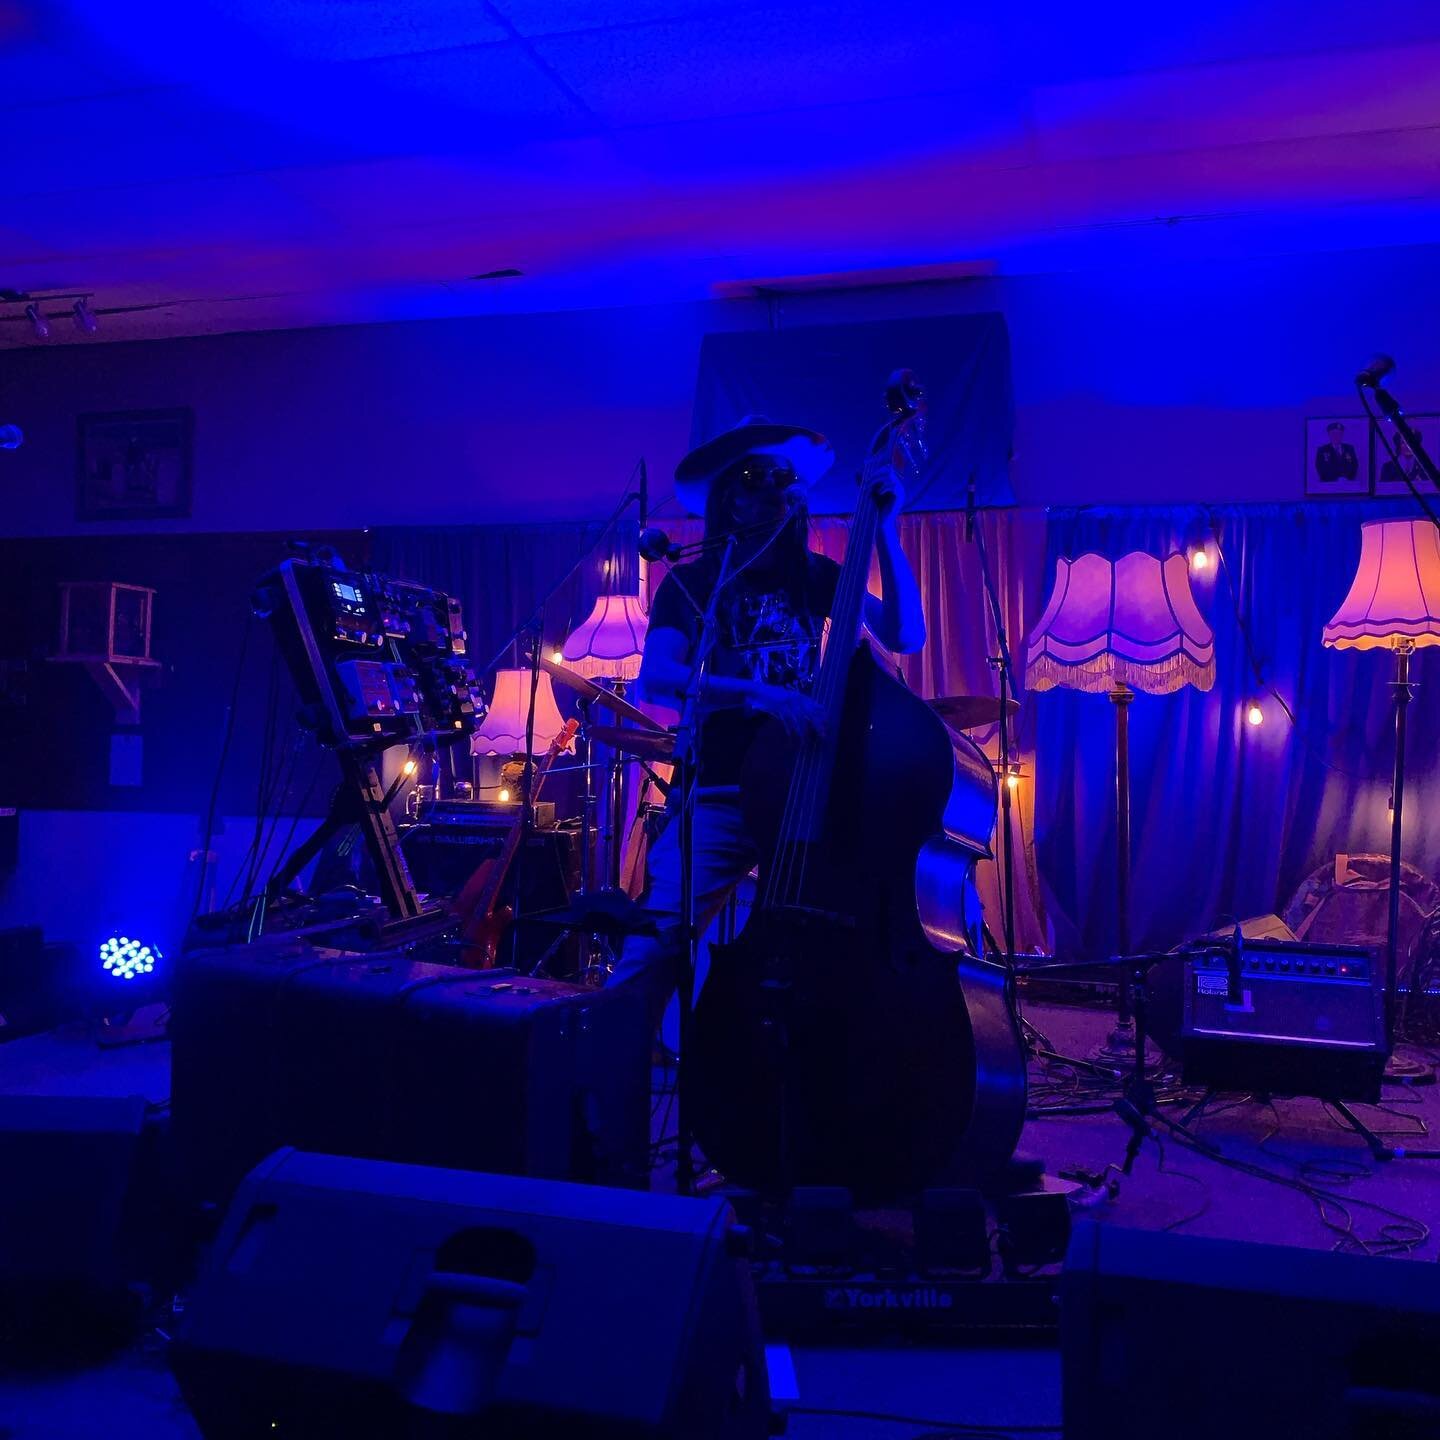 Photo/vid bomb from the @thisisbrittam and @thebrainporter show from the 30th at the @legion43pg .  What a night!  Thanks to all the kind folks who came out to support the show :) Looking forward to the next one with @mothersunmusic , @trombonissimo_